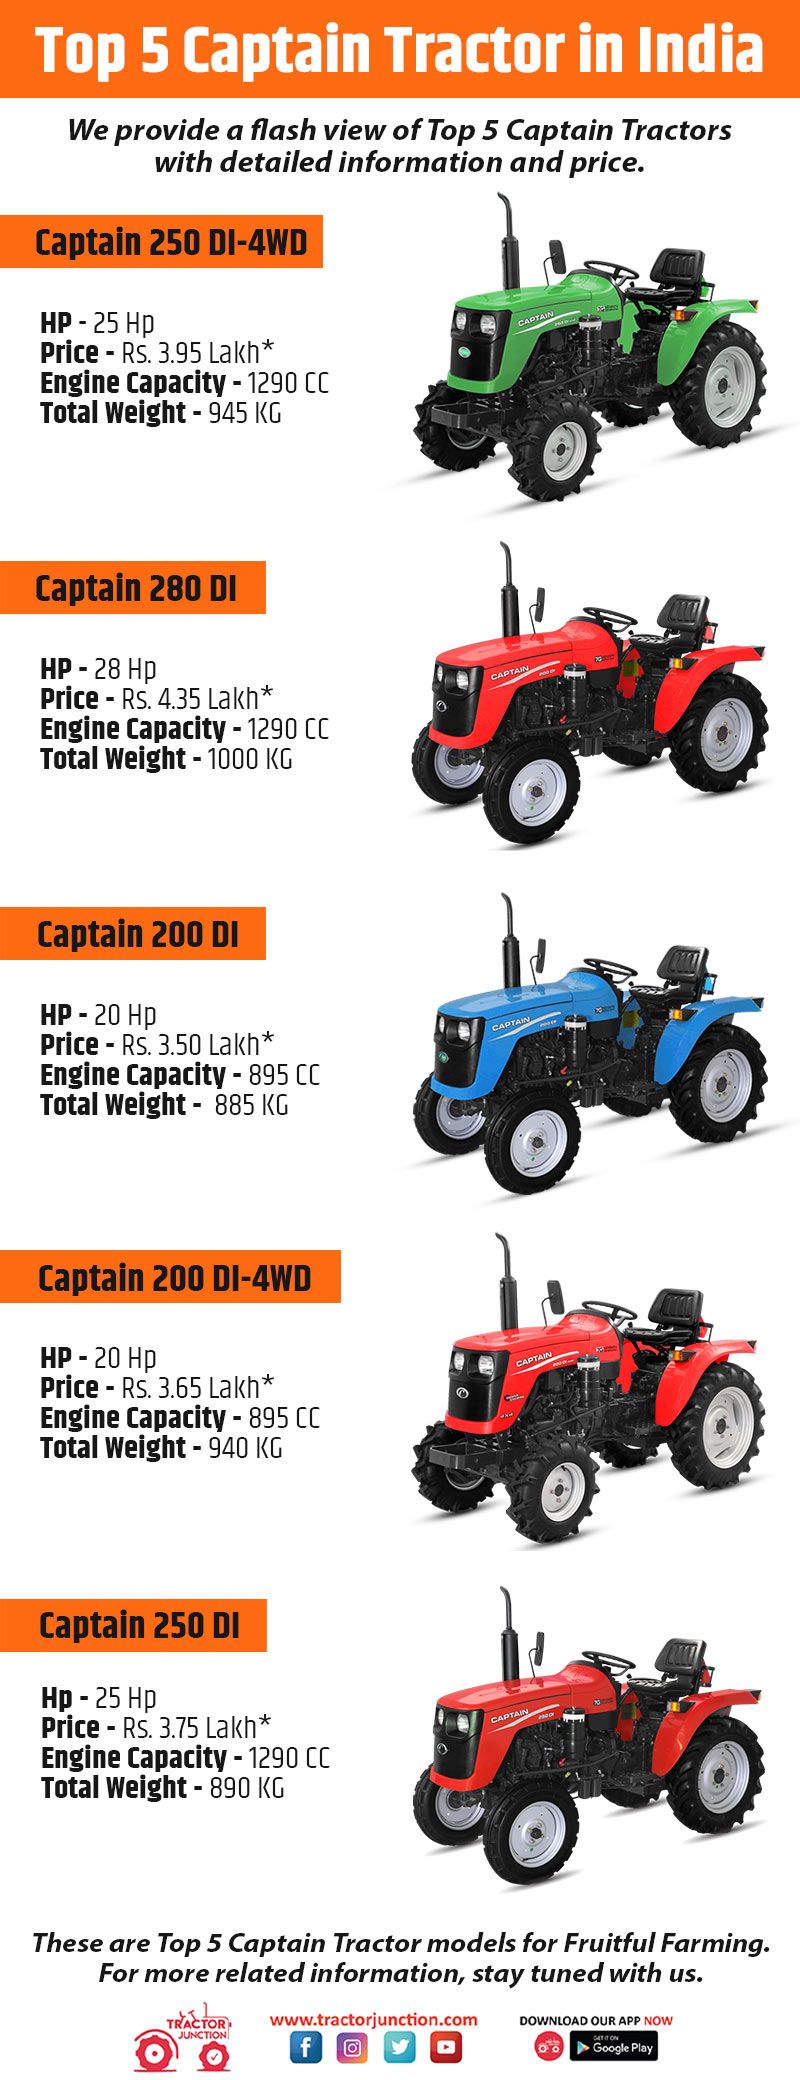 Top 5 Captain Tractor in India - Infographic